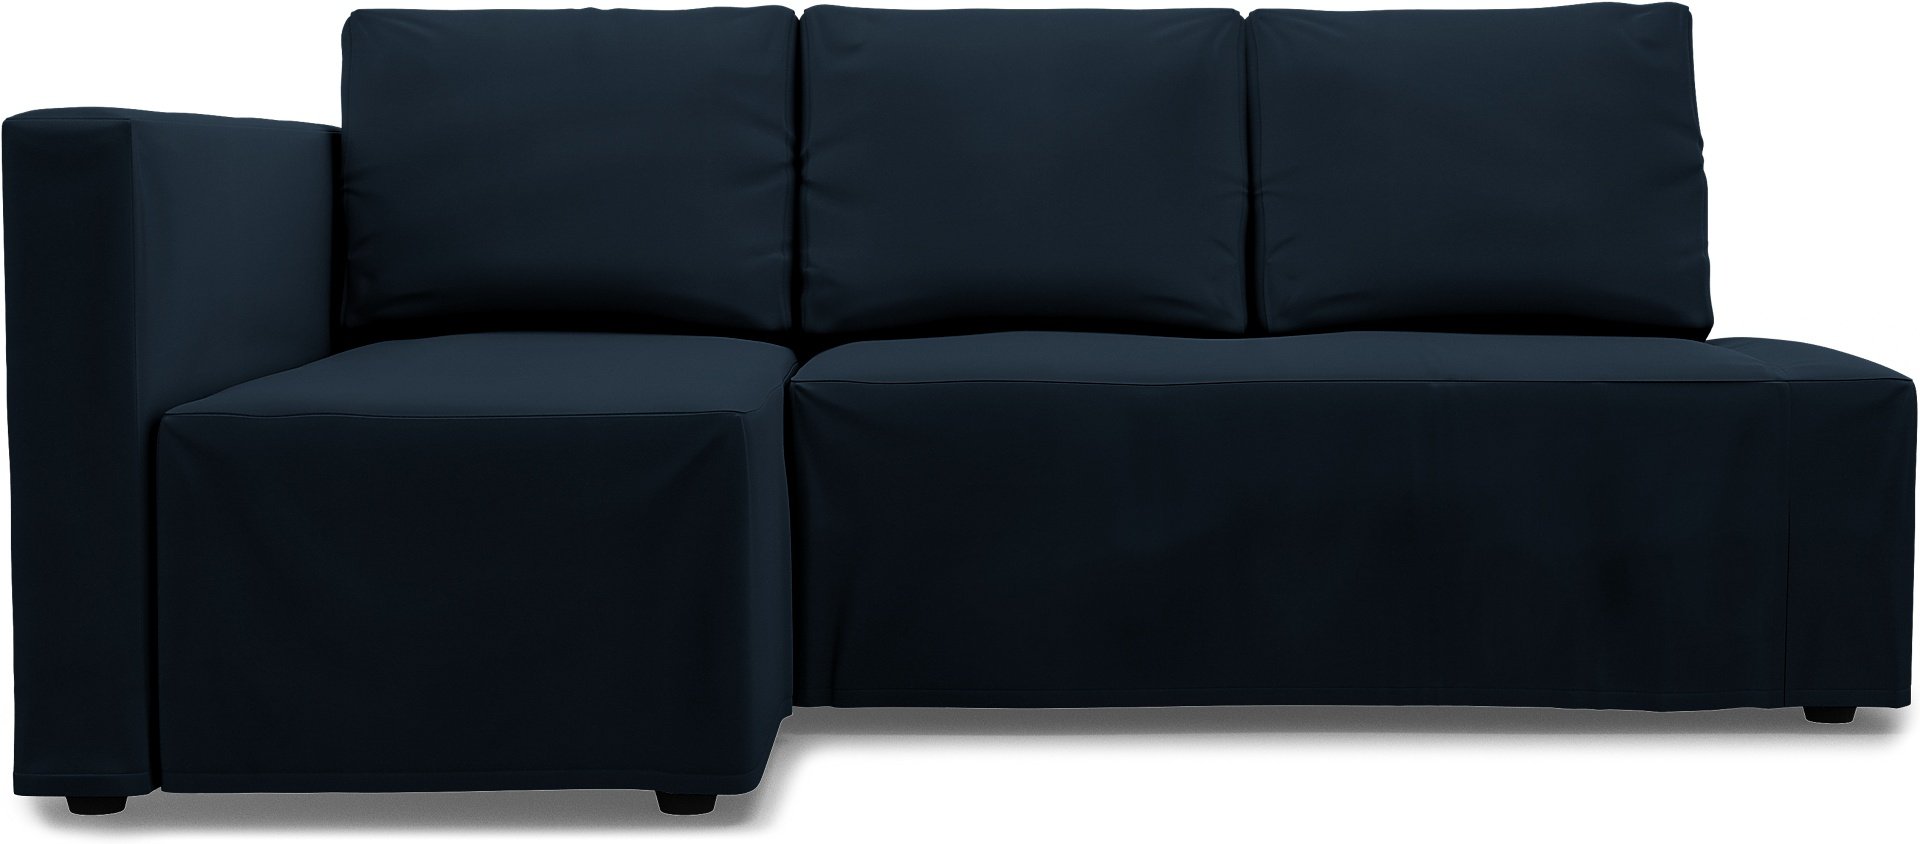 IKEA - Friheten Sofa Bed with Left Chaise Cover, Navy Blue, Cotton - Bemz